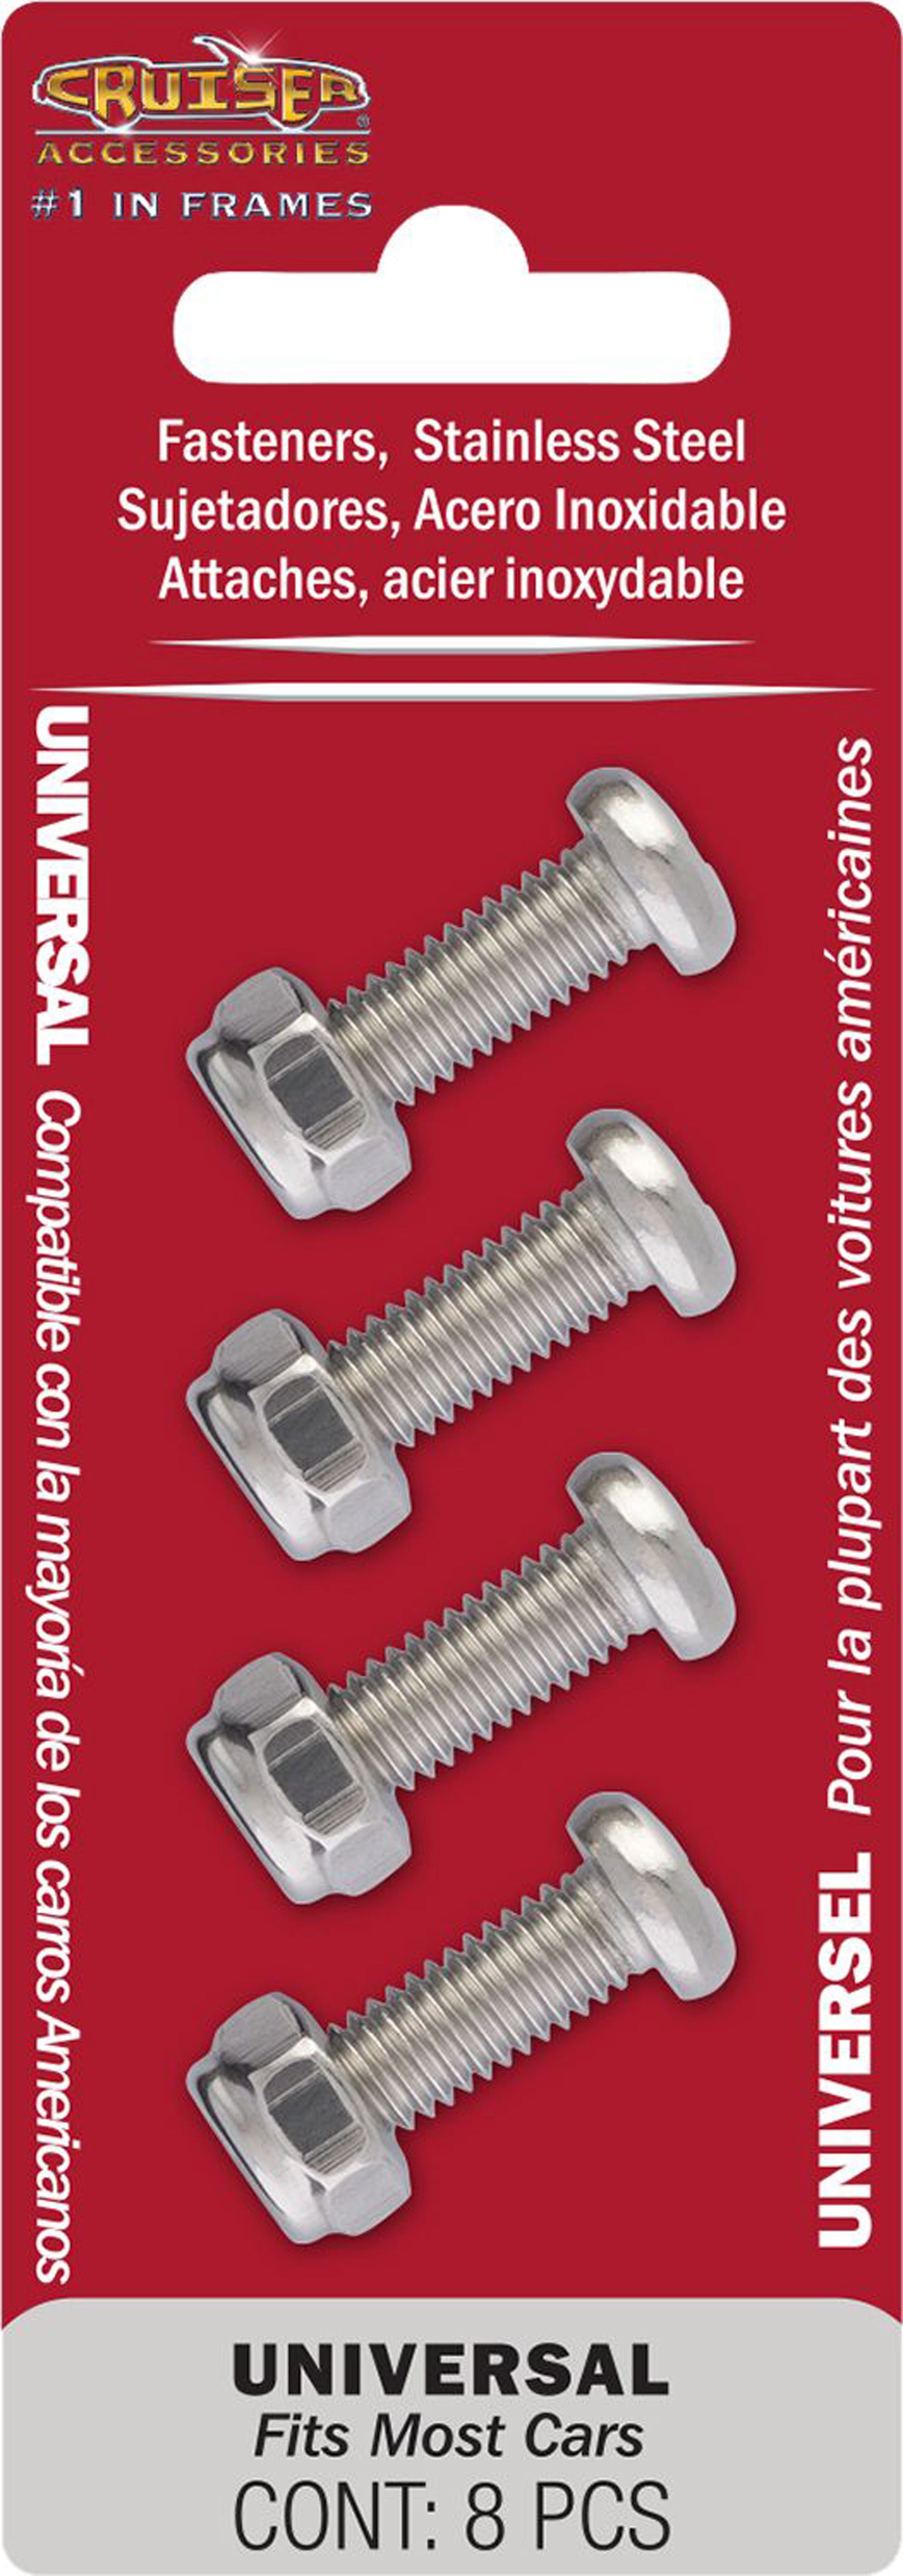 Cruiser Accessories 80630 Stainless Steel License Plate Fasteners - Pack of 4